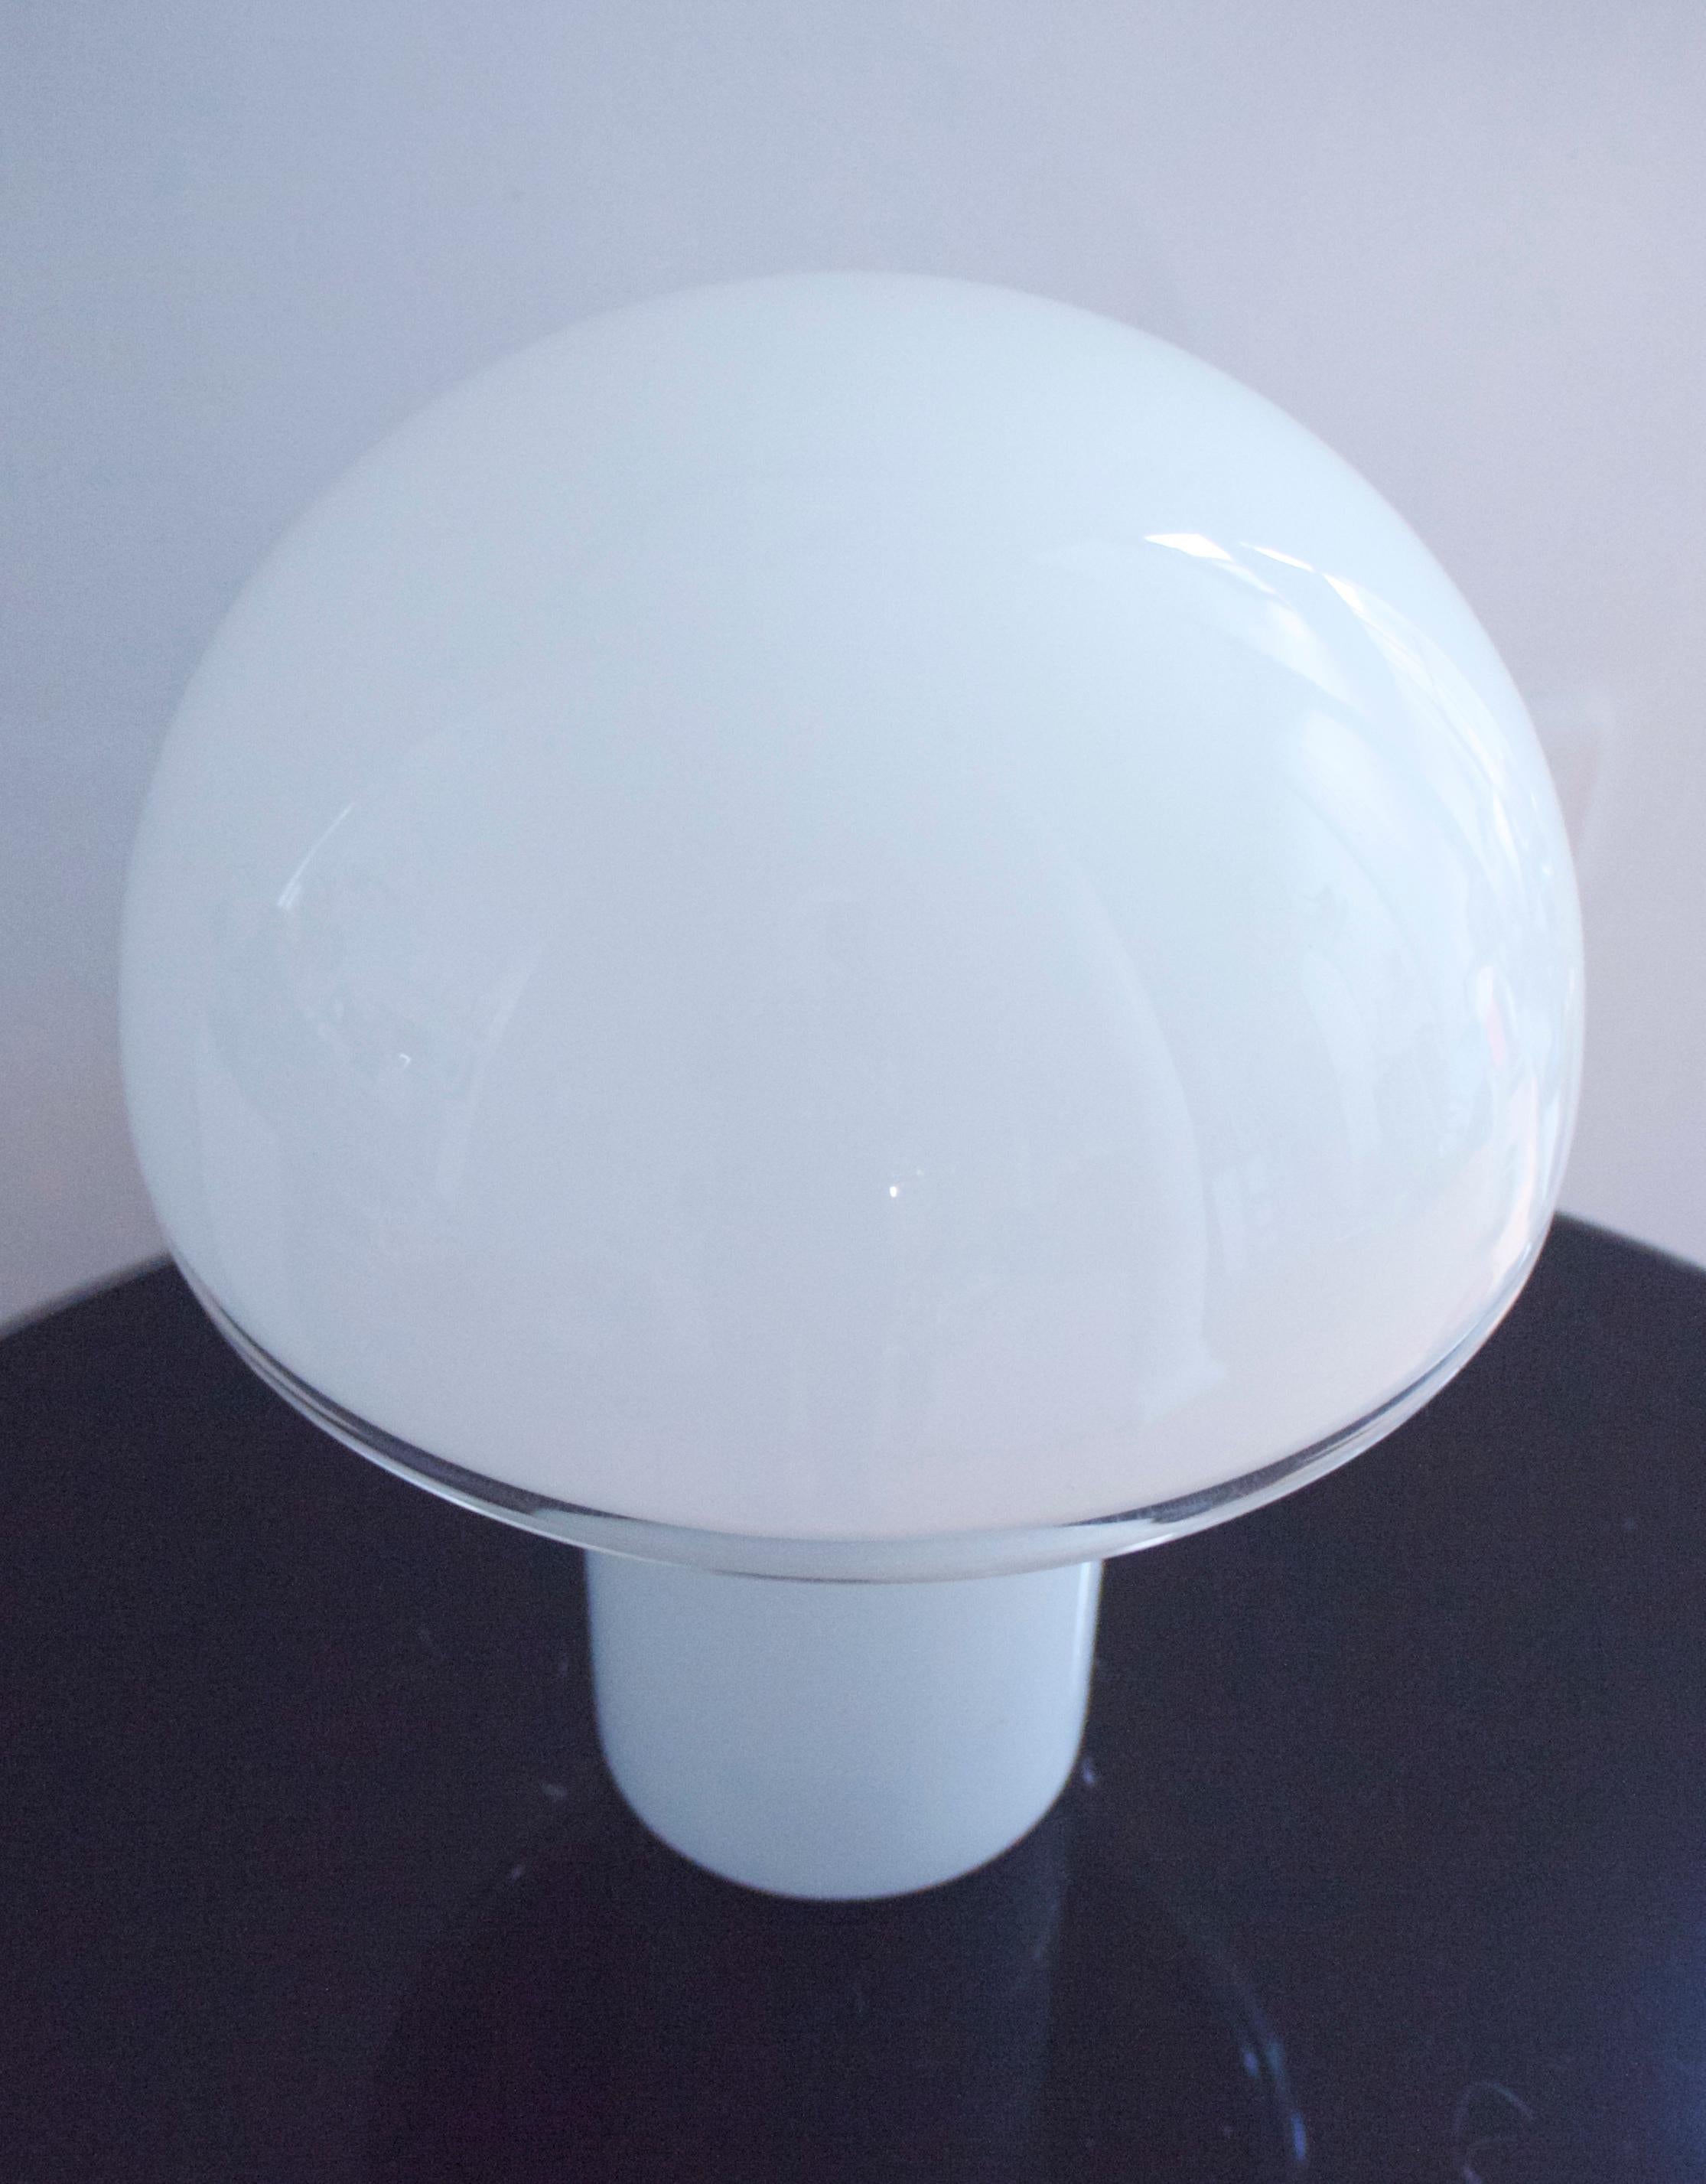 Murano Onfale Mushroom Opaline Lamp Luciano Vistosi for Artemide, 1978

This lamp is the medium size in the range and has been rewired - this can be changed to receiving country standard.
Measures: Height 32 cms
Diameter at widest 30 cms.